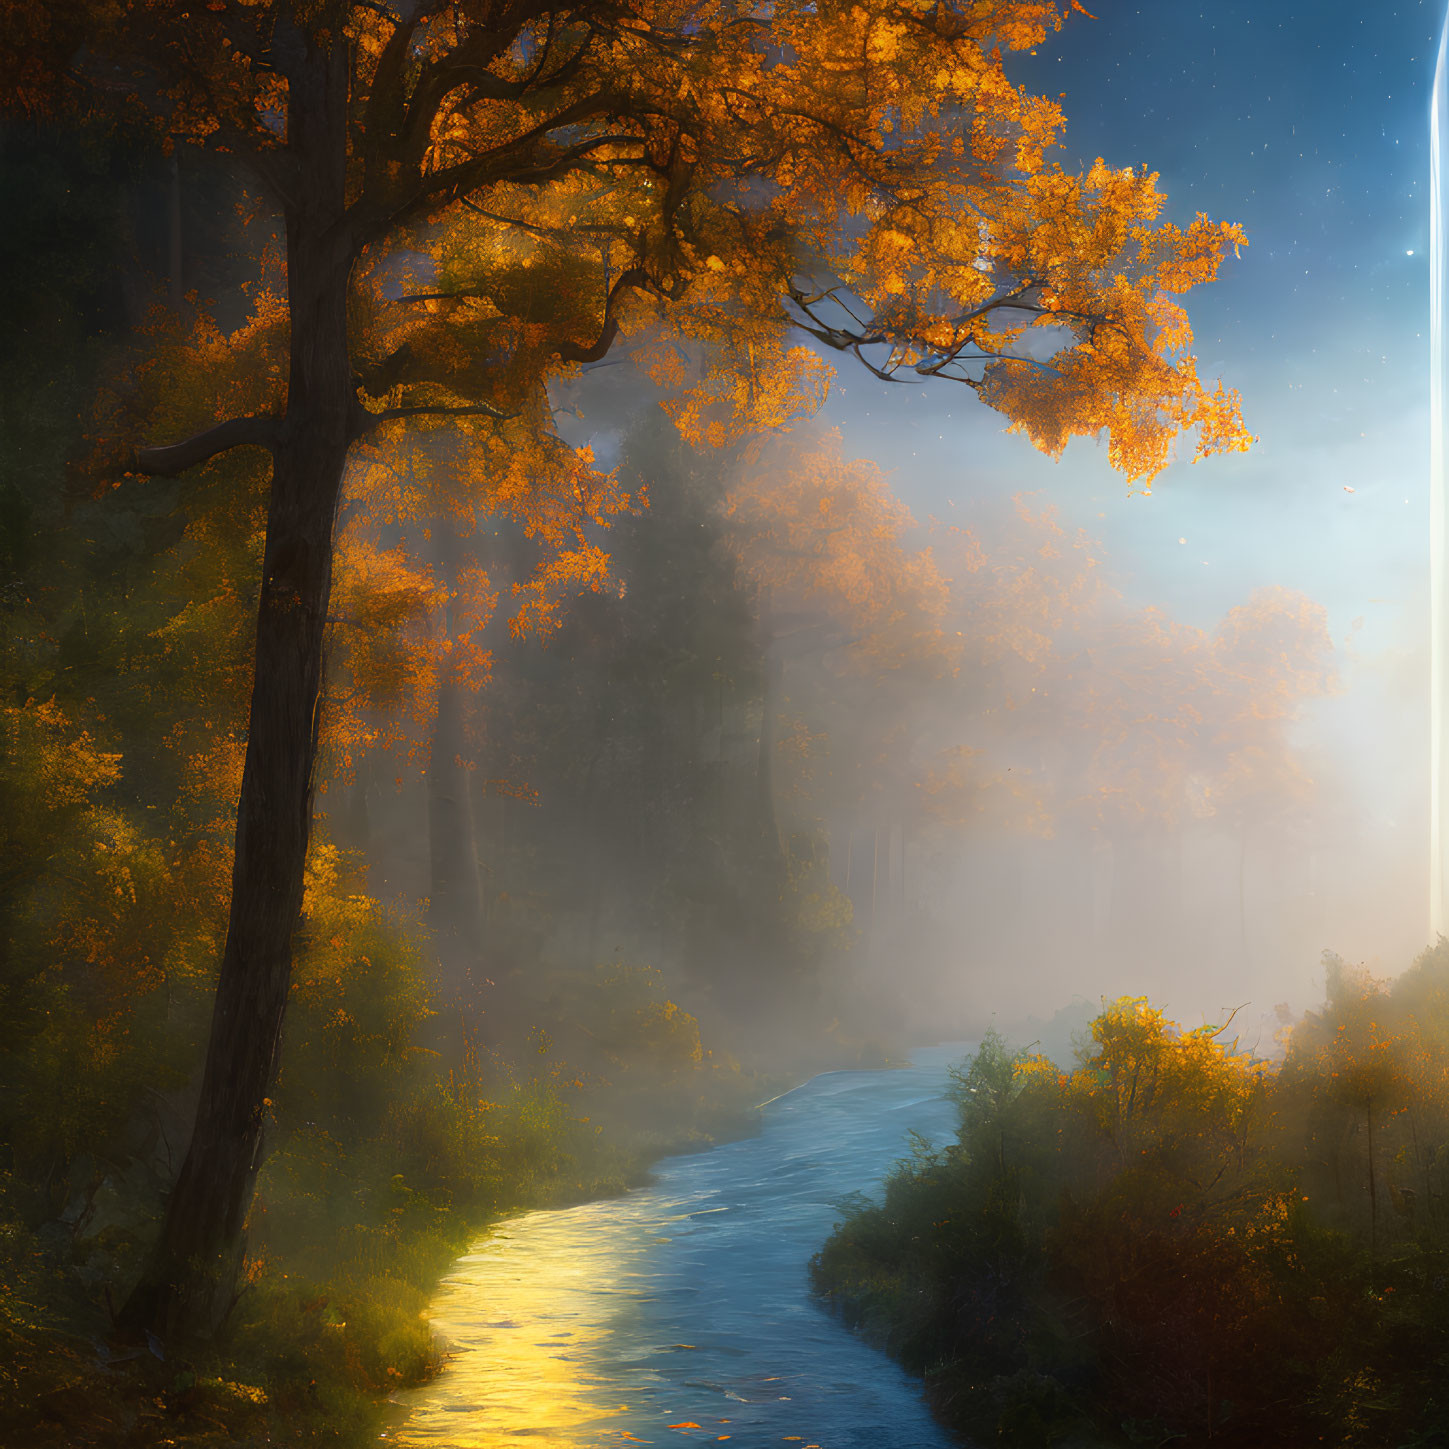 Tranquil forest path with glowing stream and autumn leaves